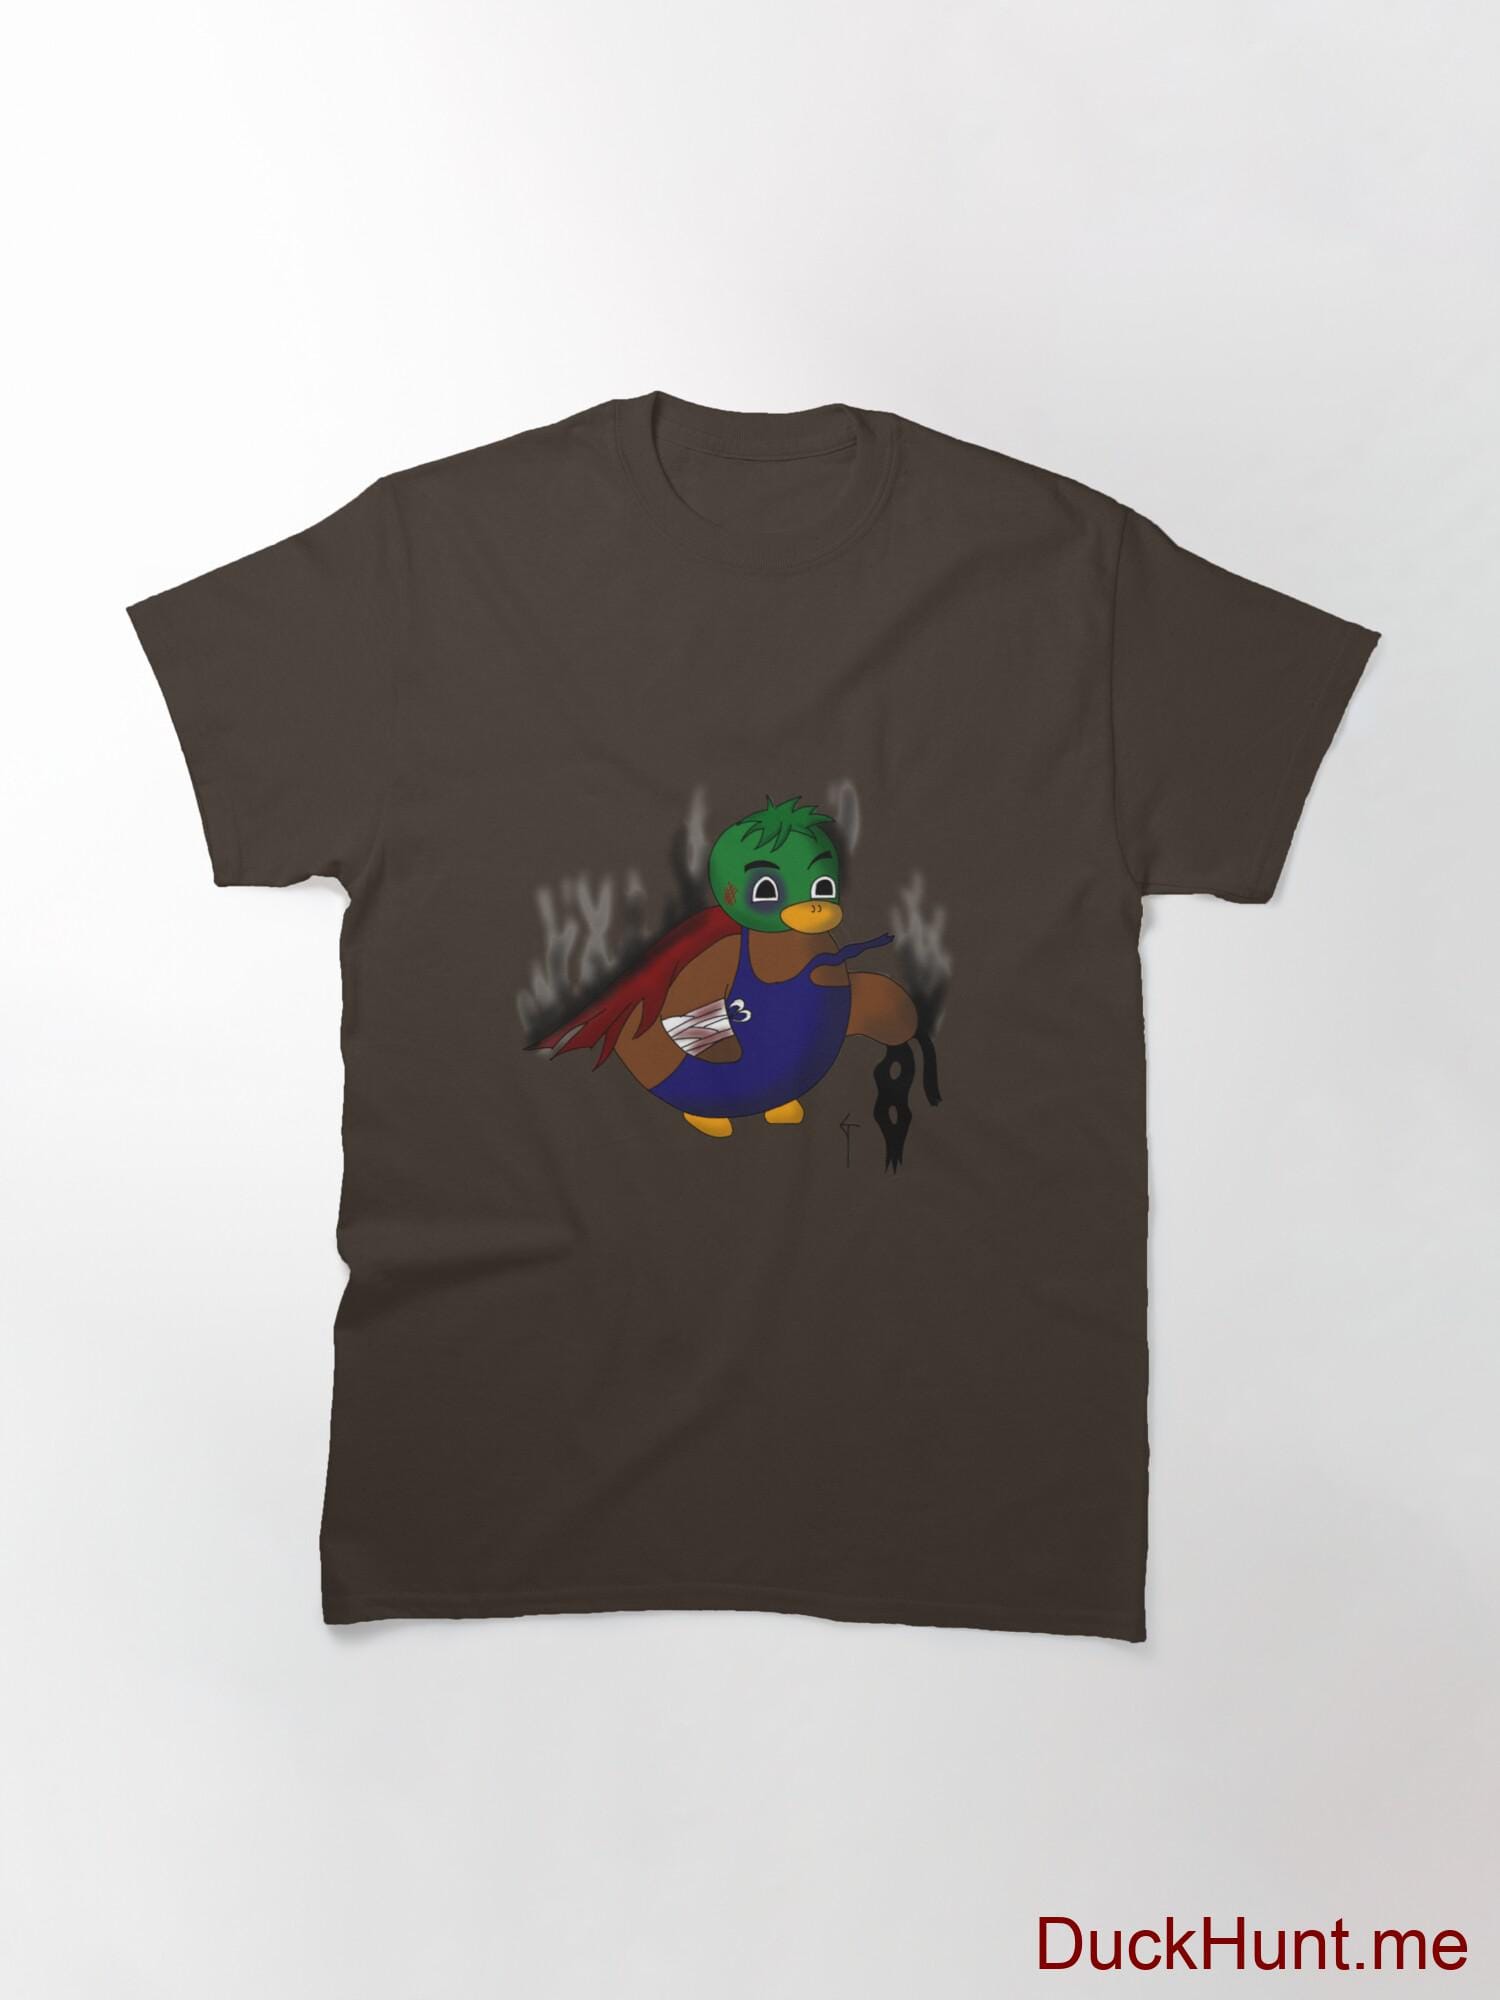 Dead Boss Duck (smoky) Brown Classic T-Shirt (Front printed) alternative image 2